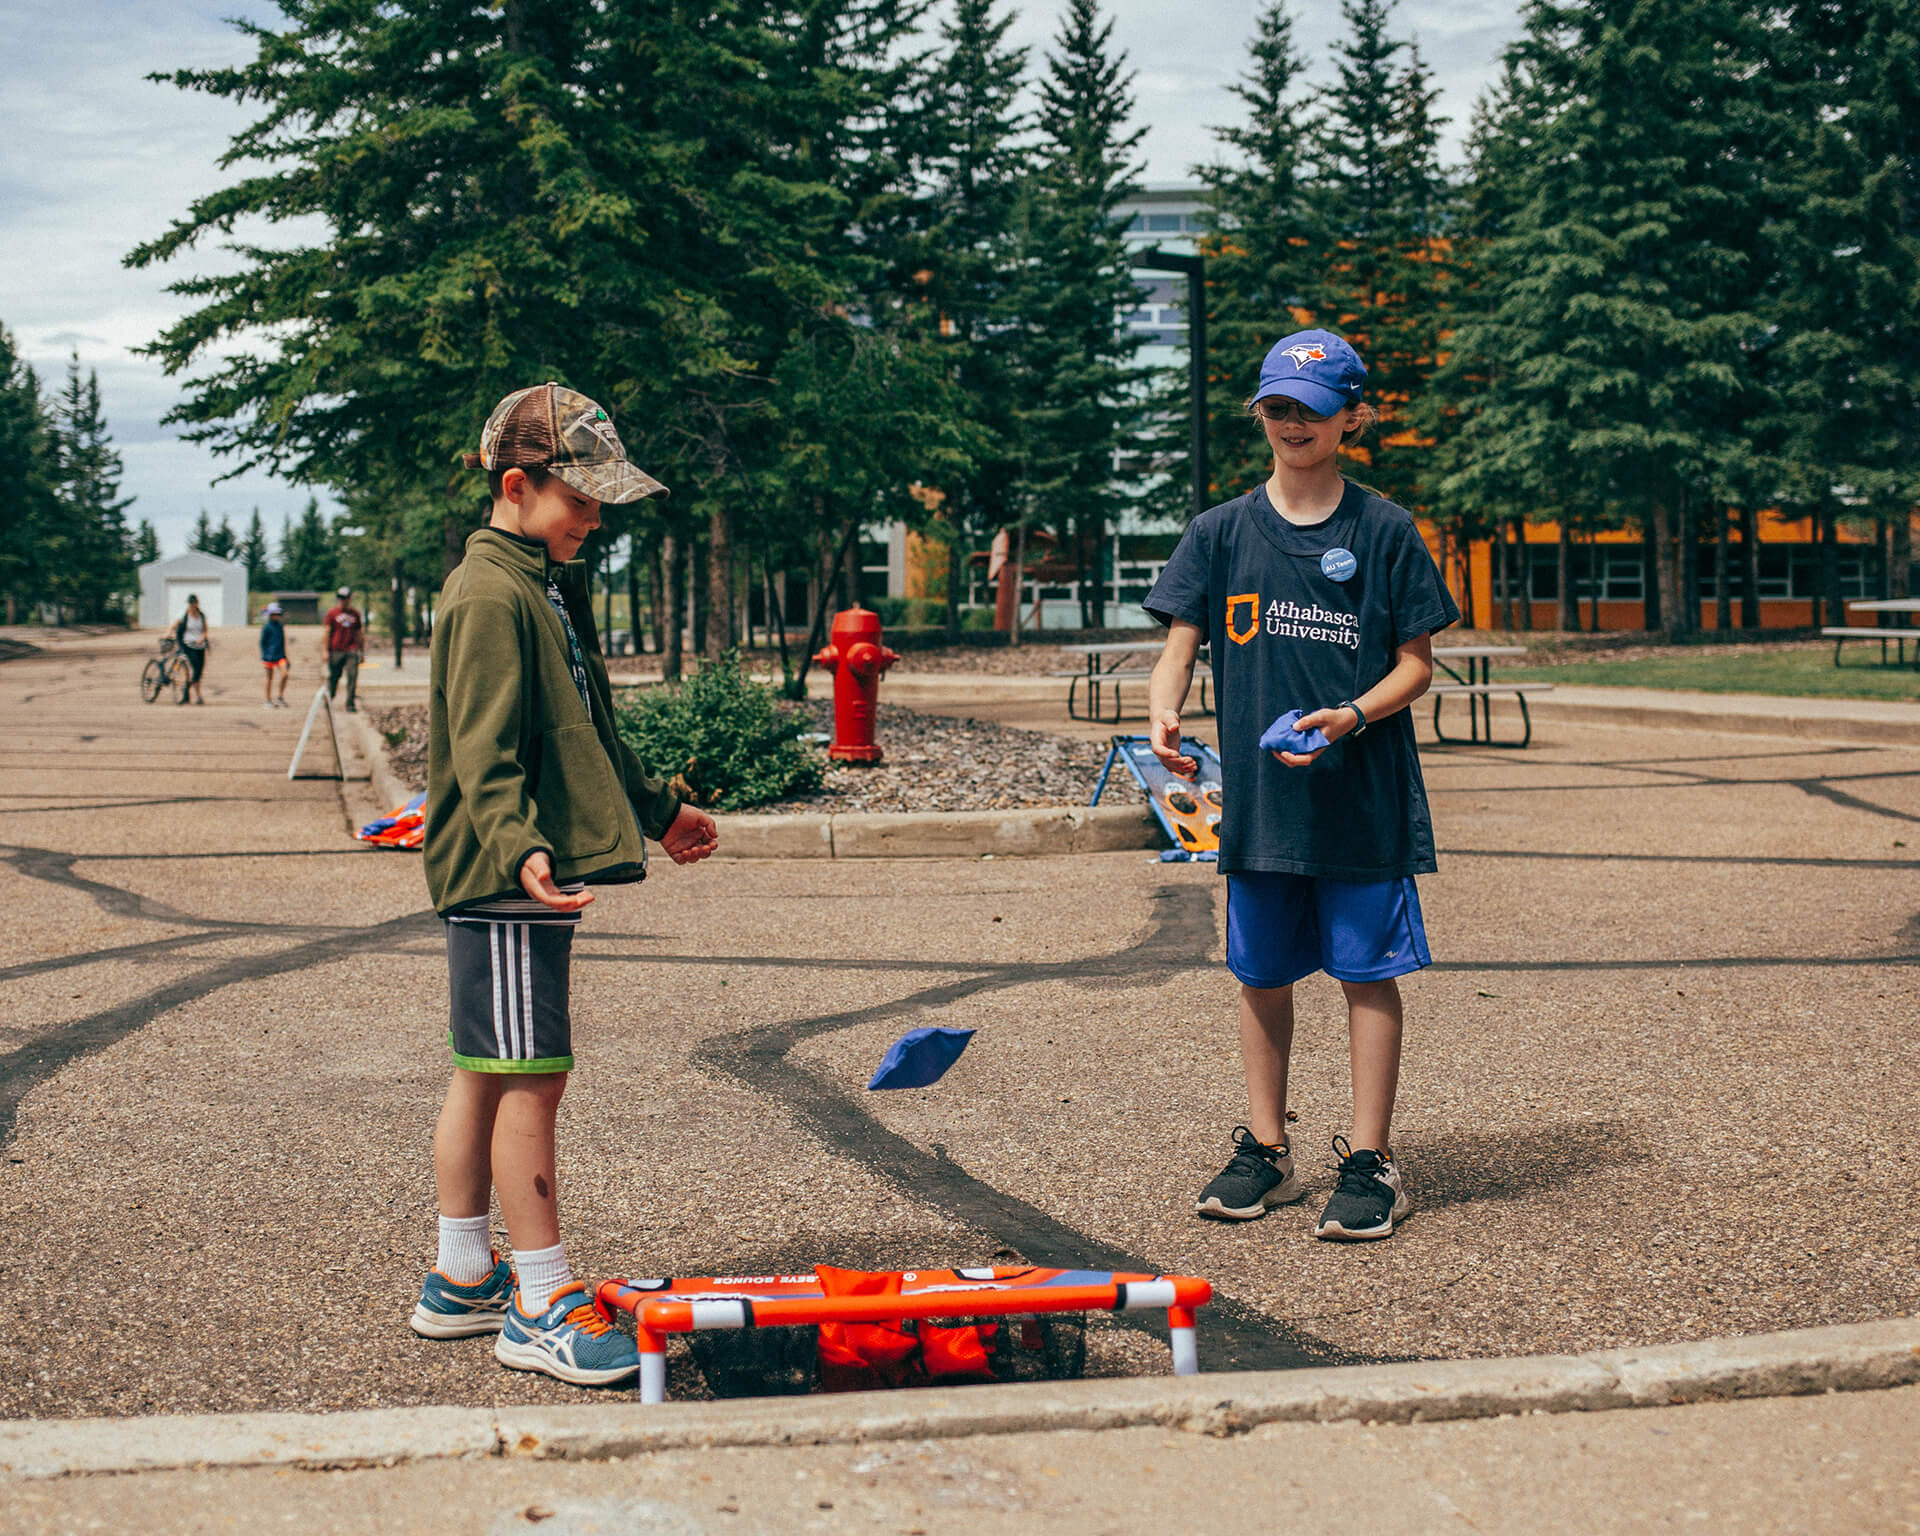 kids enjoy games Athabasca University’s main campus for homecoming June 18.